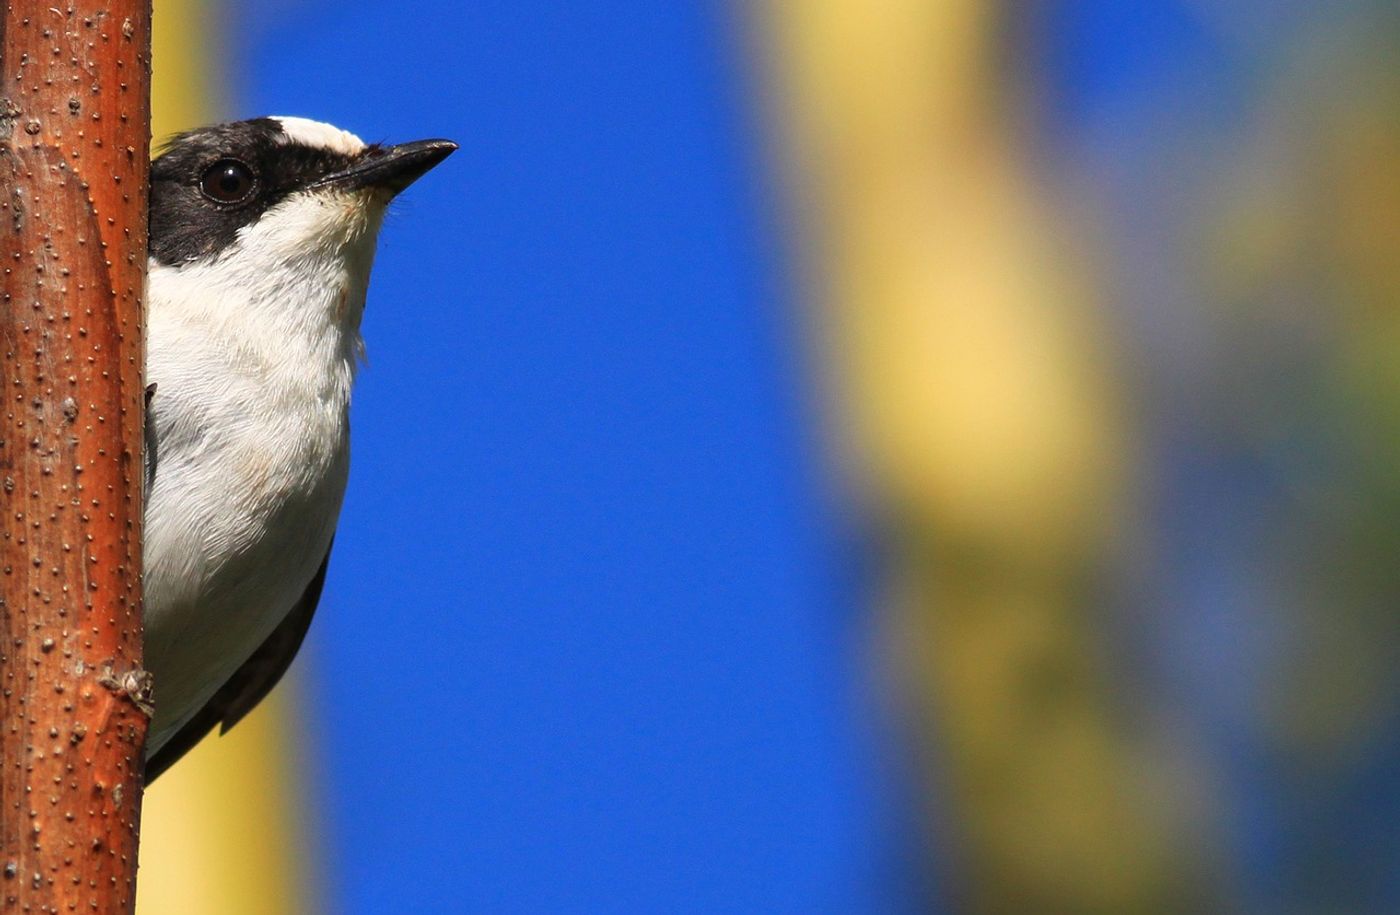 The collared flycatcher is one example of a songbird used in this study to find out if genetics have anything to do with song discrimination.